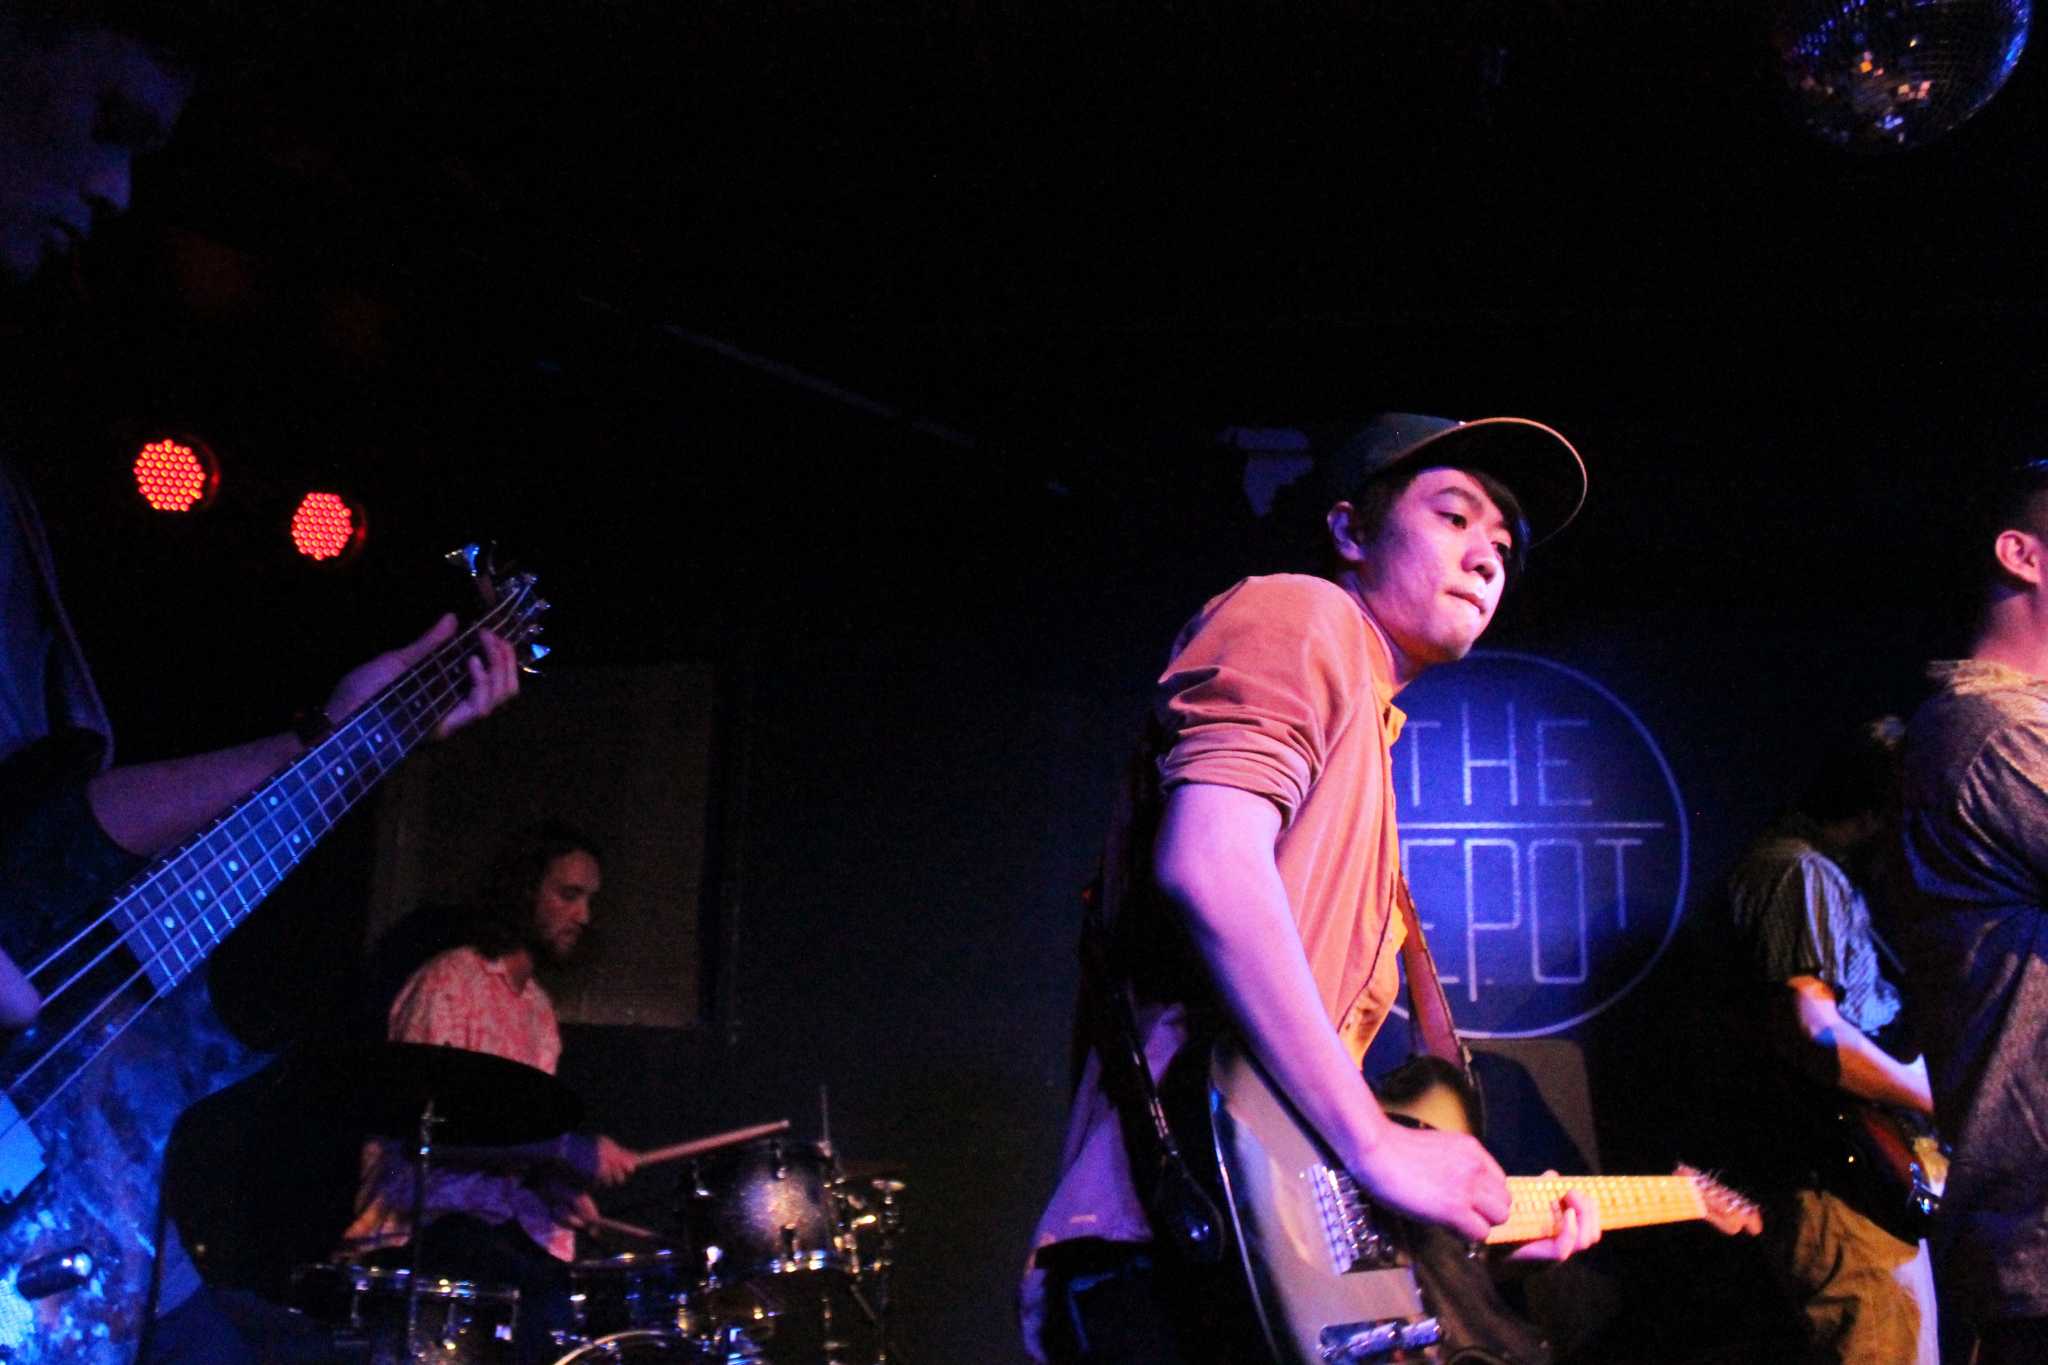 White Skies, a student-run band, plays at The Depot Thursday, Feb. 18, 2016. (Pablo Caballero / Xpress)